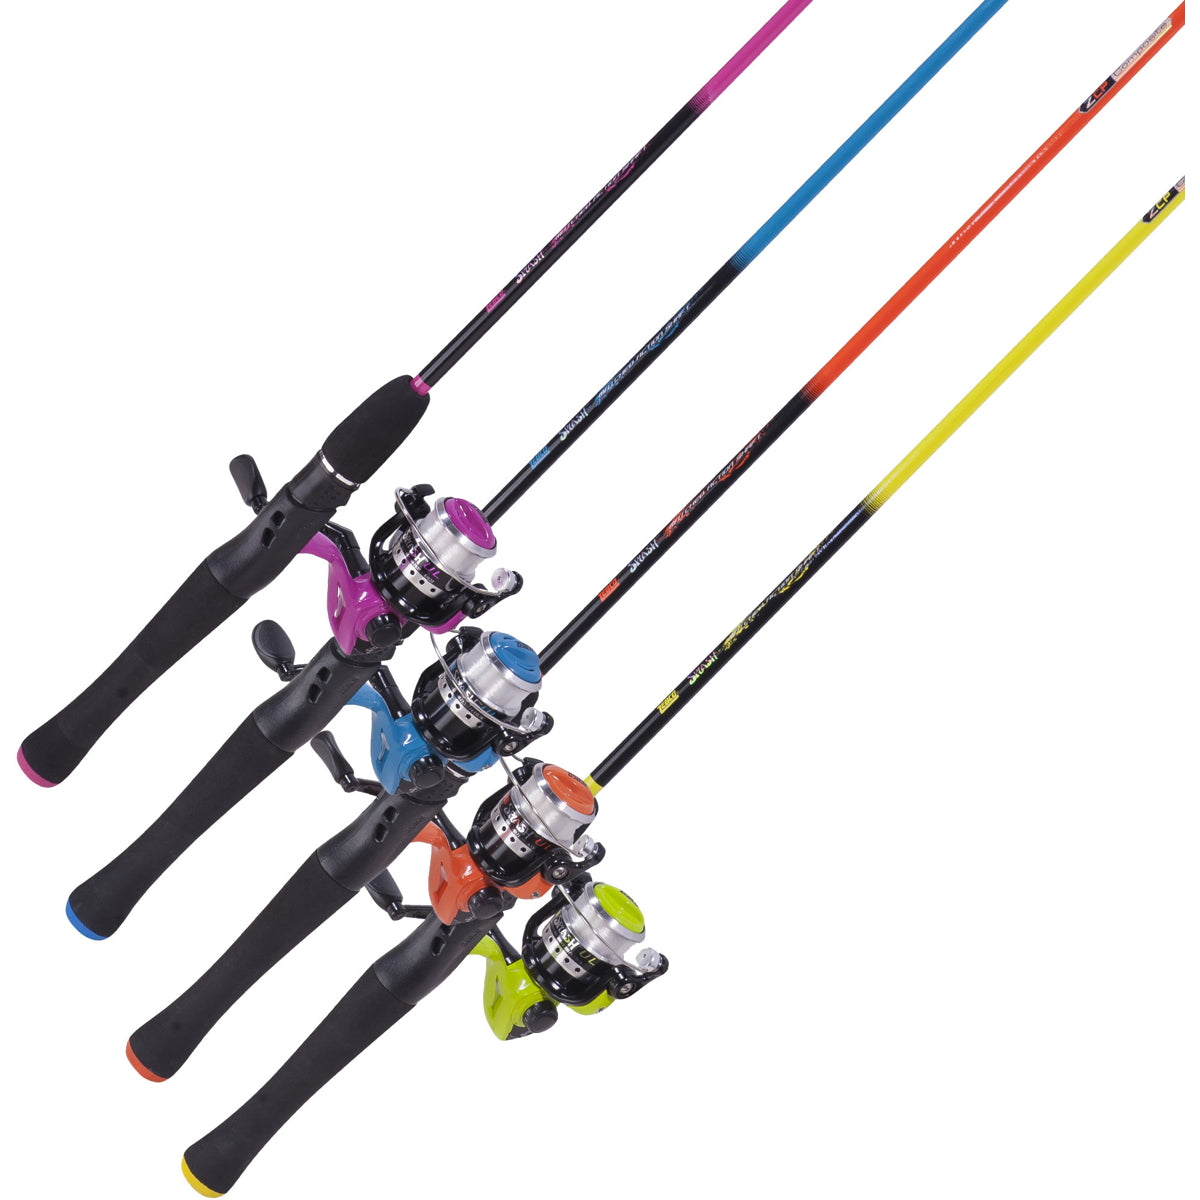 Photo of Zebco Splash Spinning Combo for sale at United Tackle Shops.